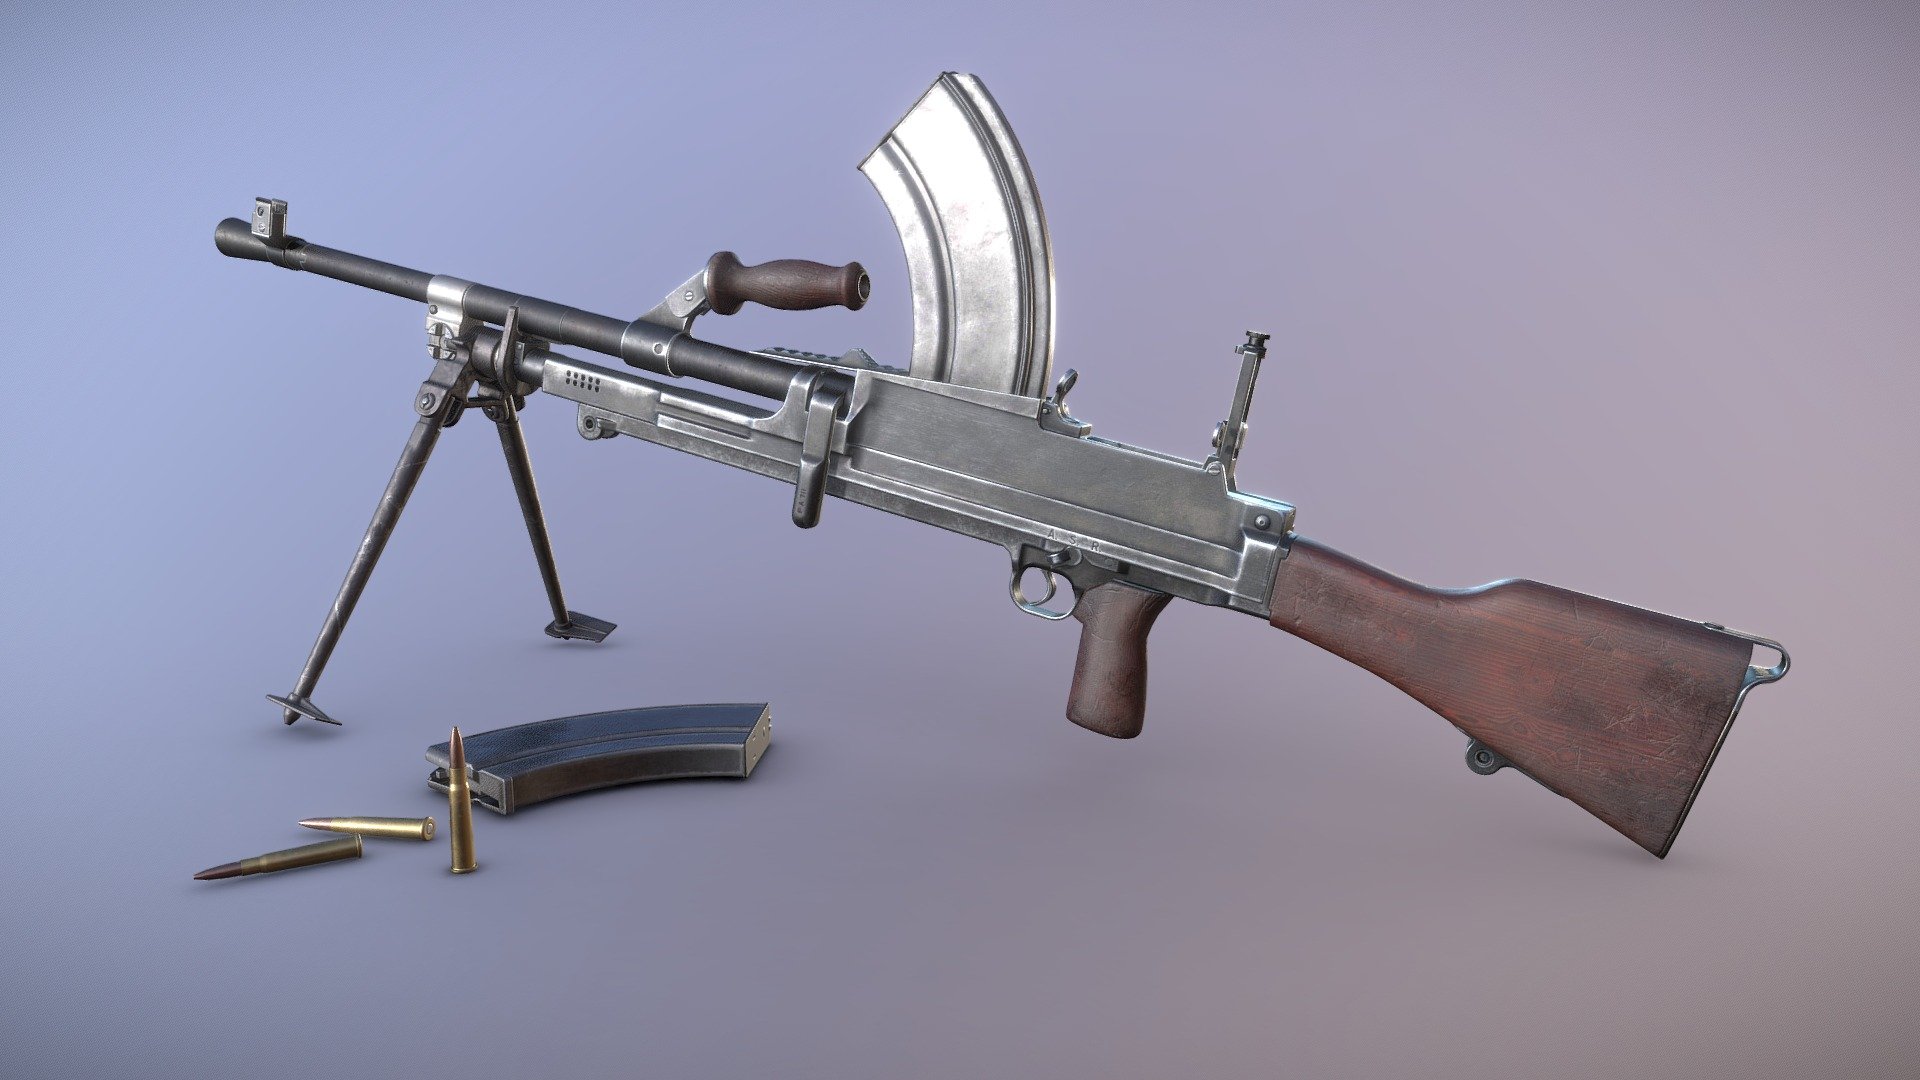 Bren light machine gun designed for PBR engines.

Originally modeled in 3ds Max 2019. Download includes .max, .fbx, .obj, metal/roughness PBR textures, textures for Unity and Unreal Engines, and additional texture maps such as curvature, AO, and color ID.

Ready for animation. Movable parts include the magazine, charging handle, bipod, fire selector, trigger and more.

Specs




Scaled to approximate real world size (centimeters)

Mesh is in tris and quads, no n-gons.

Quaded version of the mesh also included.

Textures

2 Materials: 4096x4096 Base Color, Roughness, Metallic, Normal, AO
512x512 PBR set for the cartridge

Unity Engine 5 Textures: AlbedoTransparency, MetallicSmoothness, Normal, Occlusion

Unreal Engine 4 Textures: BaseColor, Normal, RoughnessMetallicAO - Bren Mk II - For Sale - 3D model by Luchador (@Luchador90) 3d model